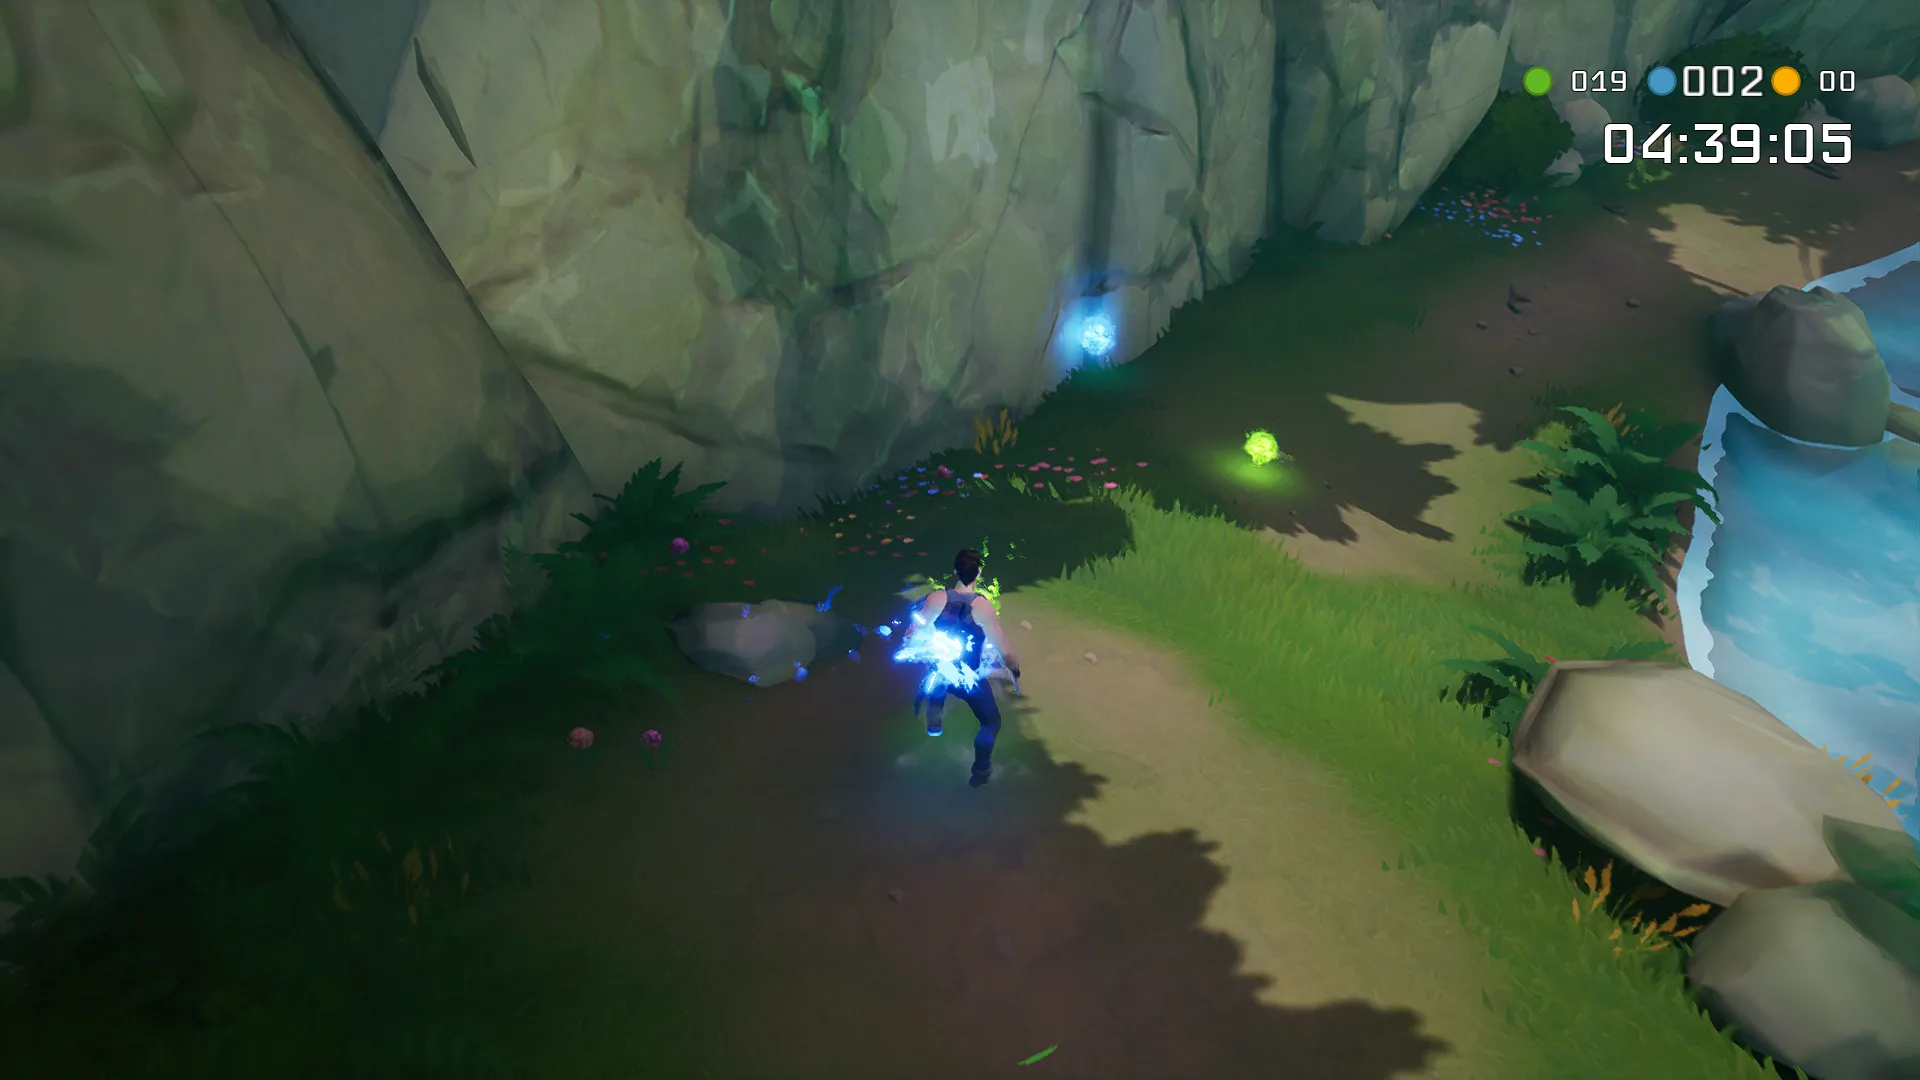 In Ascenders' combat demo, players can kill monsters to loot orbs. Orbs are the resources required to earn a point. Ascender has 3 orb rarities.